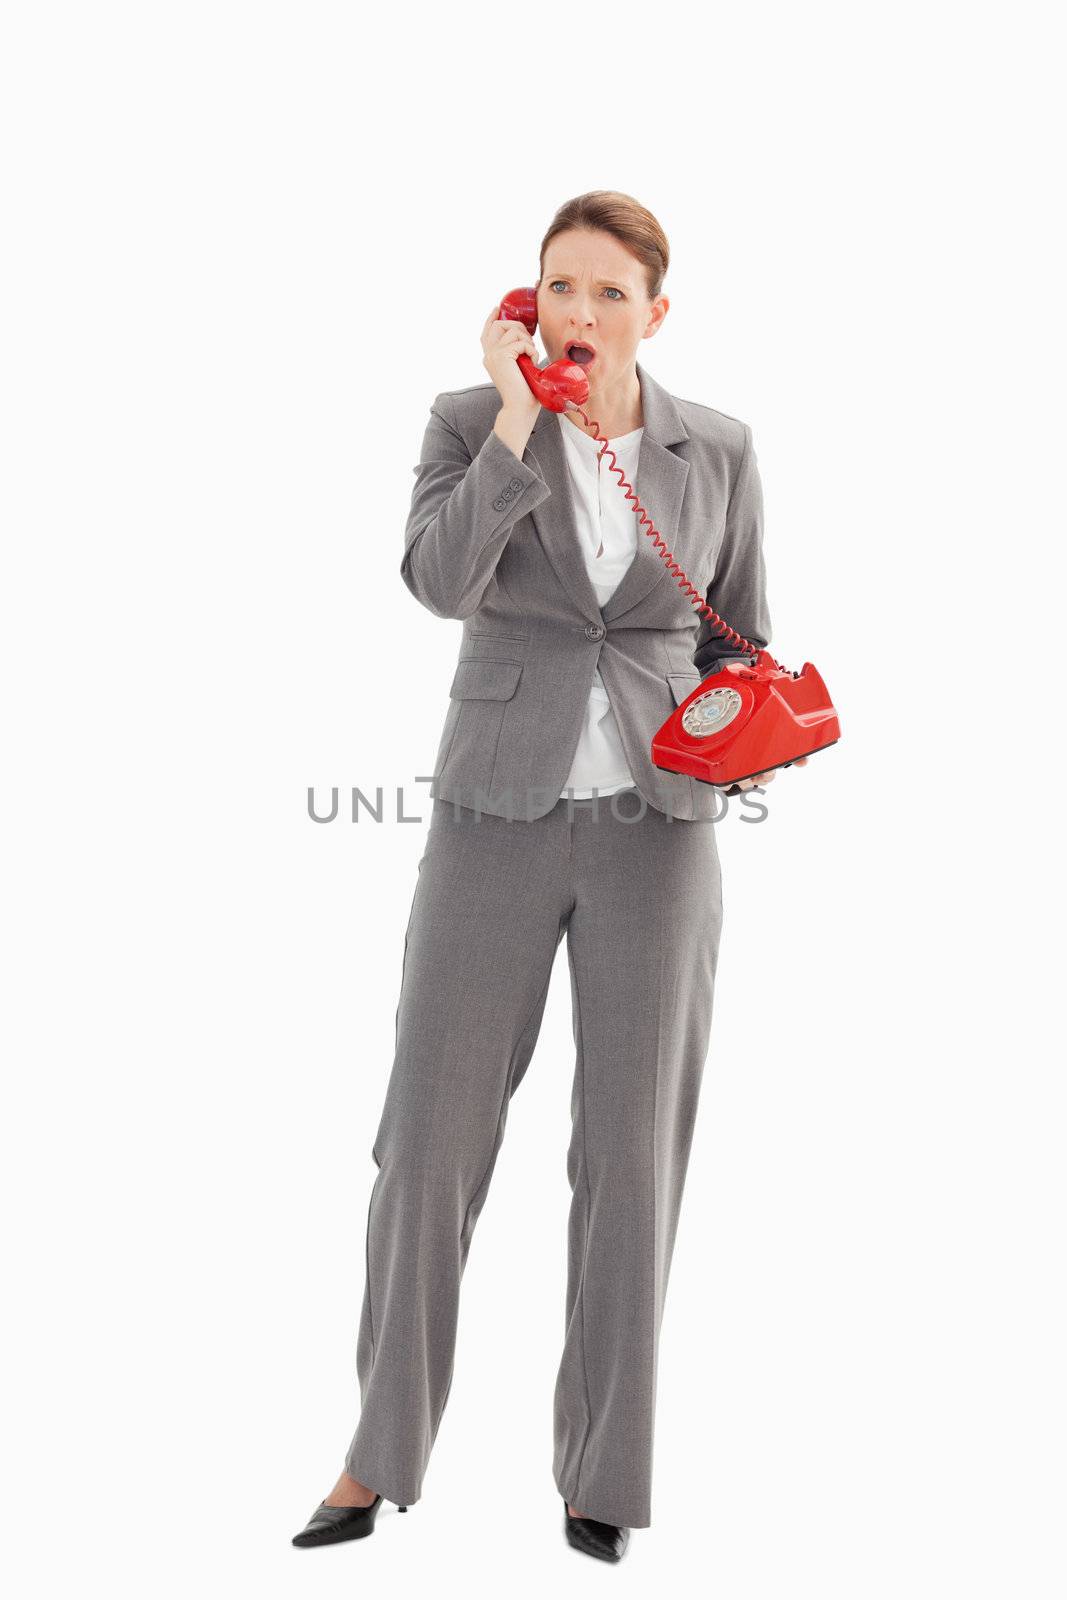 An angry businesswoman is talking on the phone